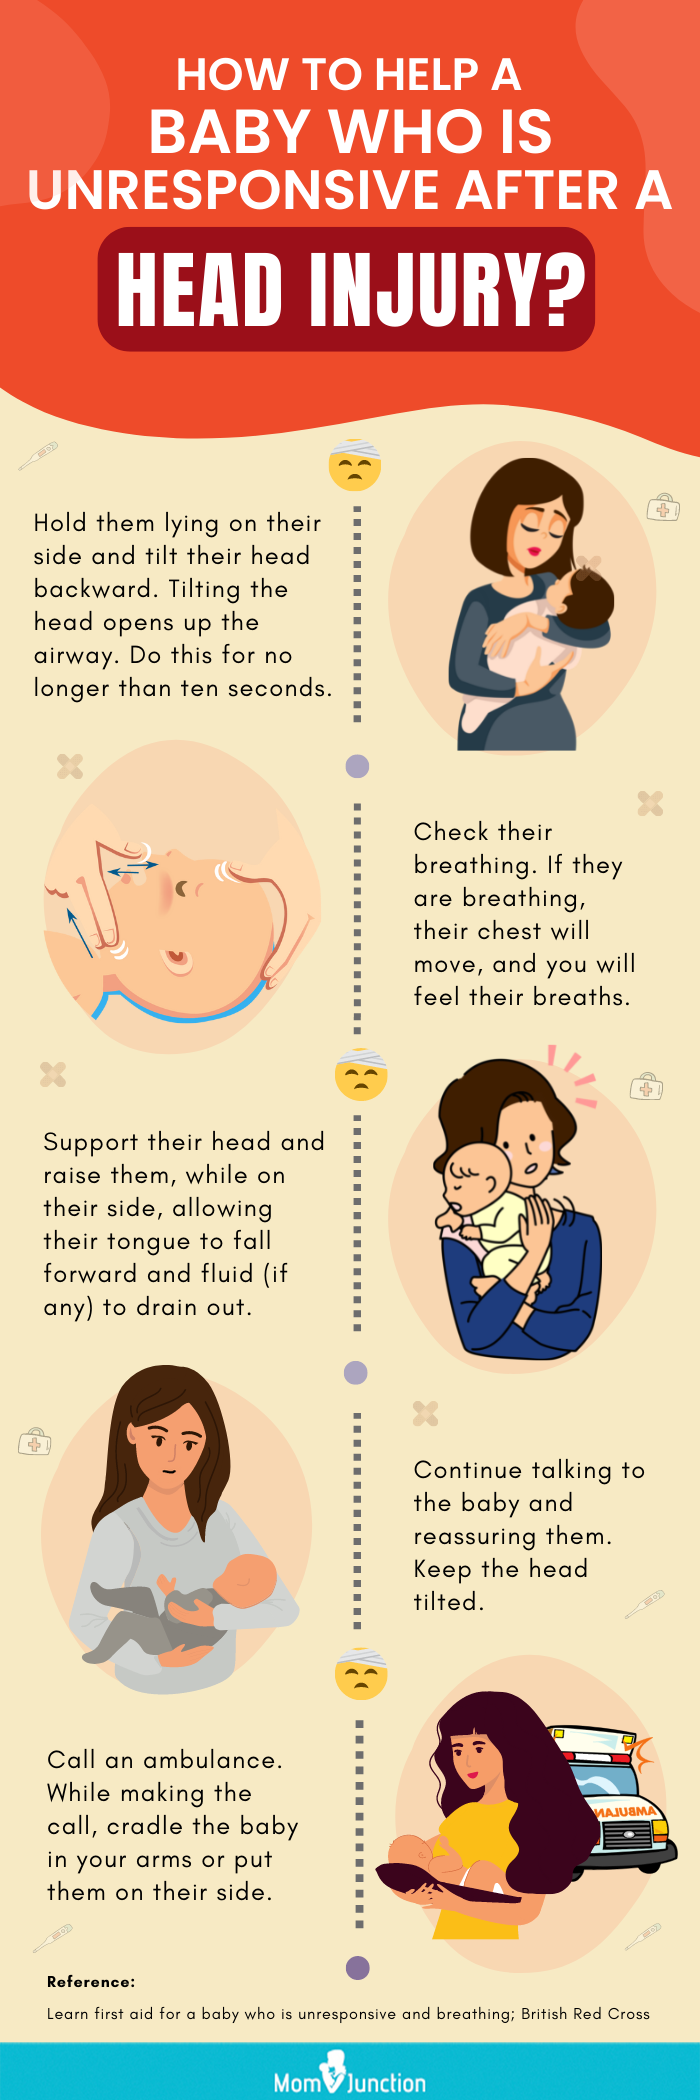 how to help a baby who is unresponsive after a head injury [infographic]